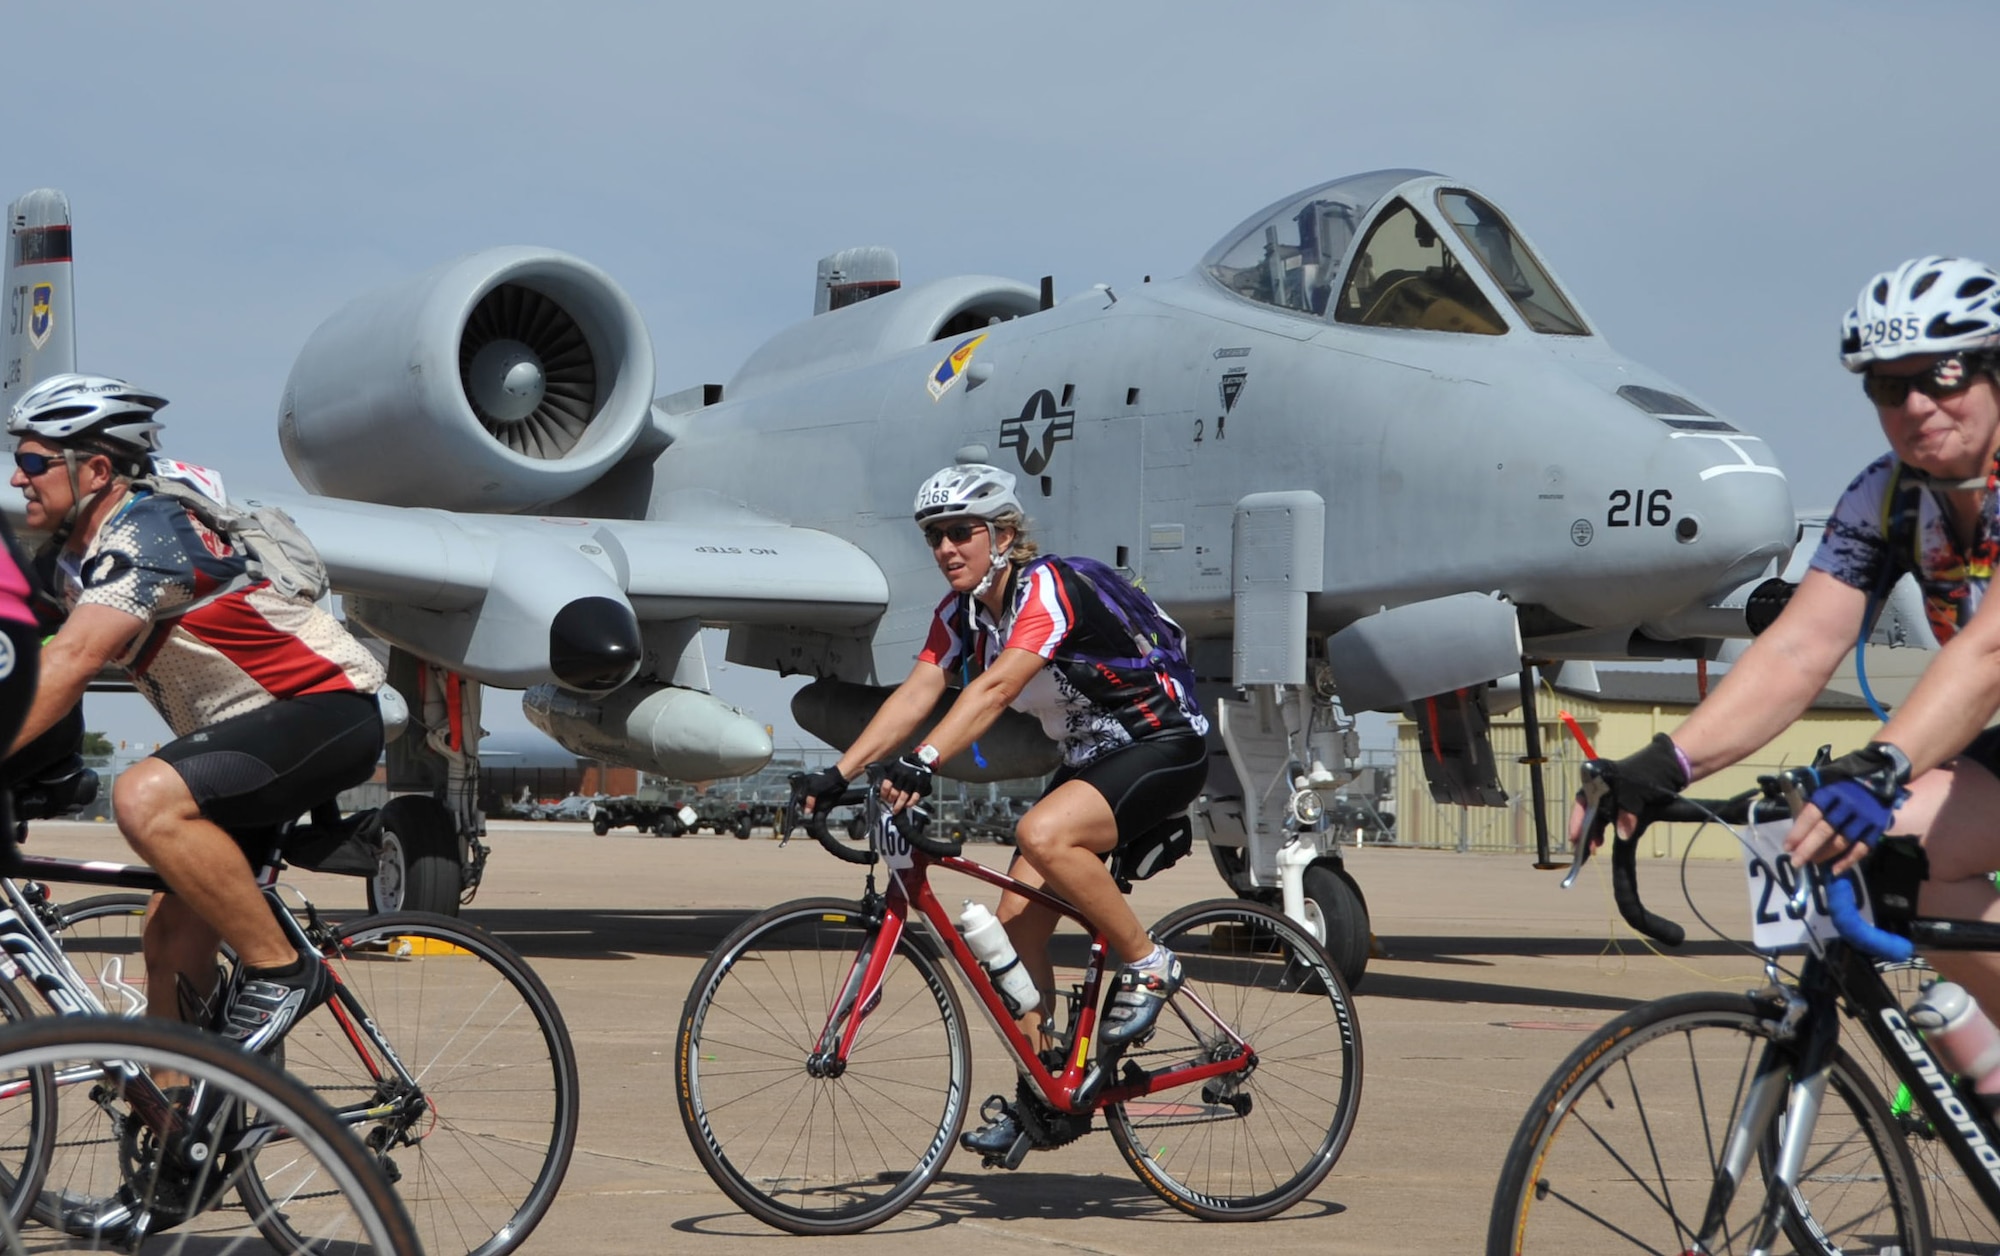 Hotter’N Hell participants cruise through Airpower Alley on Sheppard Air Force Base, Texas, Aug. 23, 2014. Cyclists competing in the Hotter’N Hell bike race passes through Airpower Alley where riders had the opportunity to meet and greet Air Force pilots and take pictures with several different aircraft. (U.S. Air Force photo/Airman 1st Class Robert L. McIlrath)